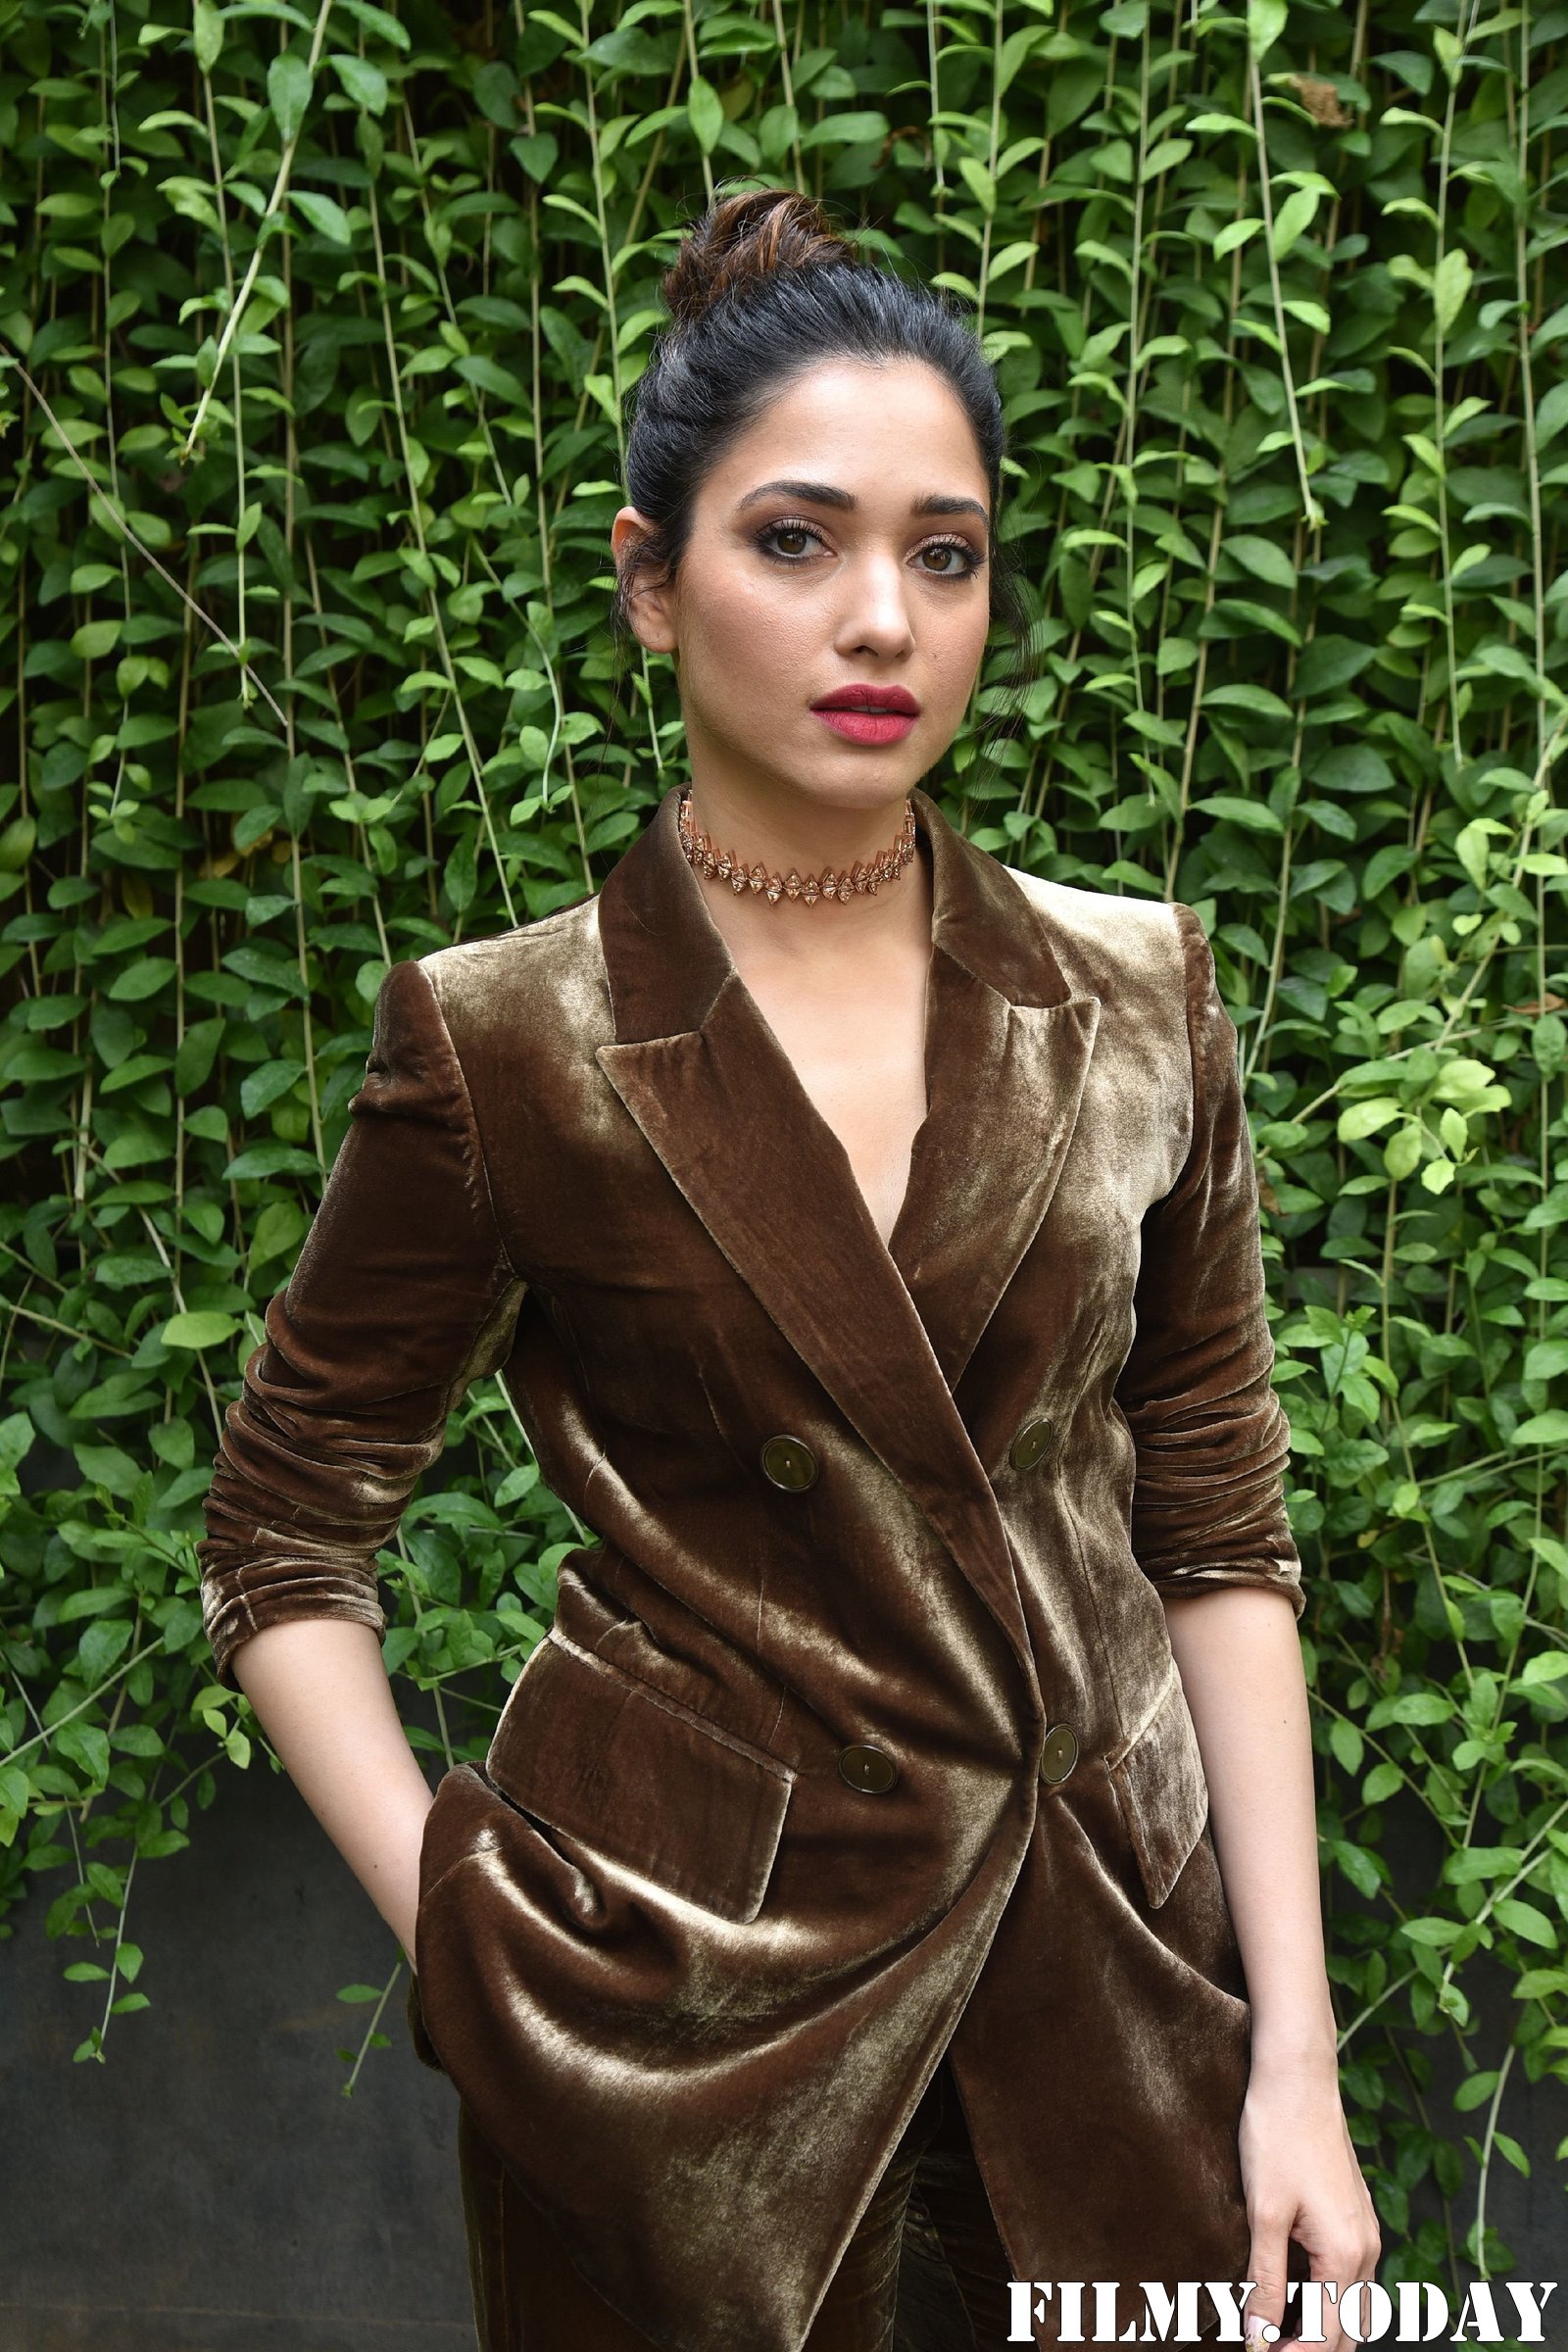 Photos: Tamanna Bhatia At Action Movie Promotions | Picture 1697940